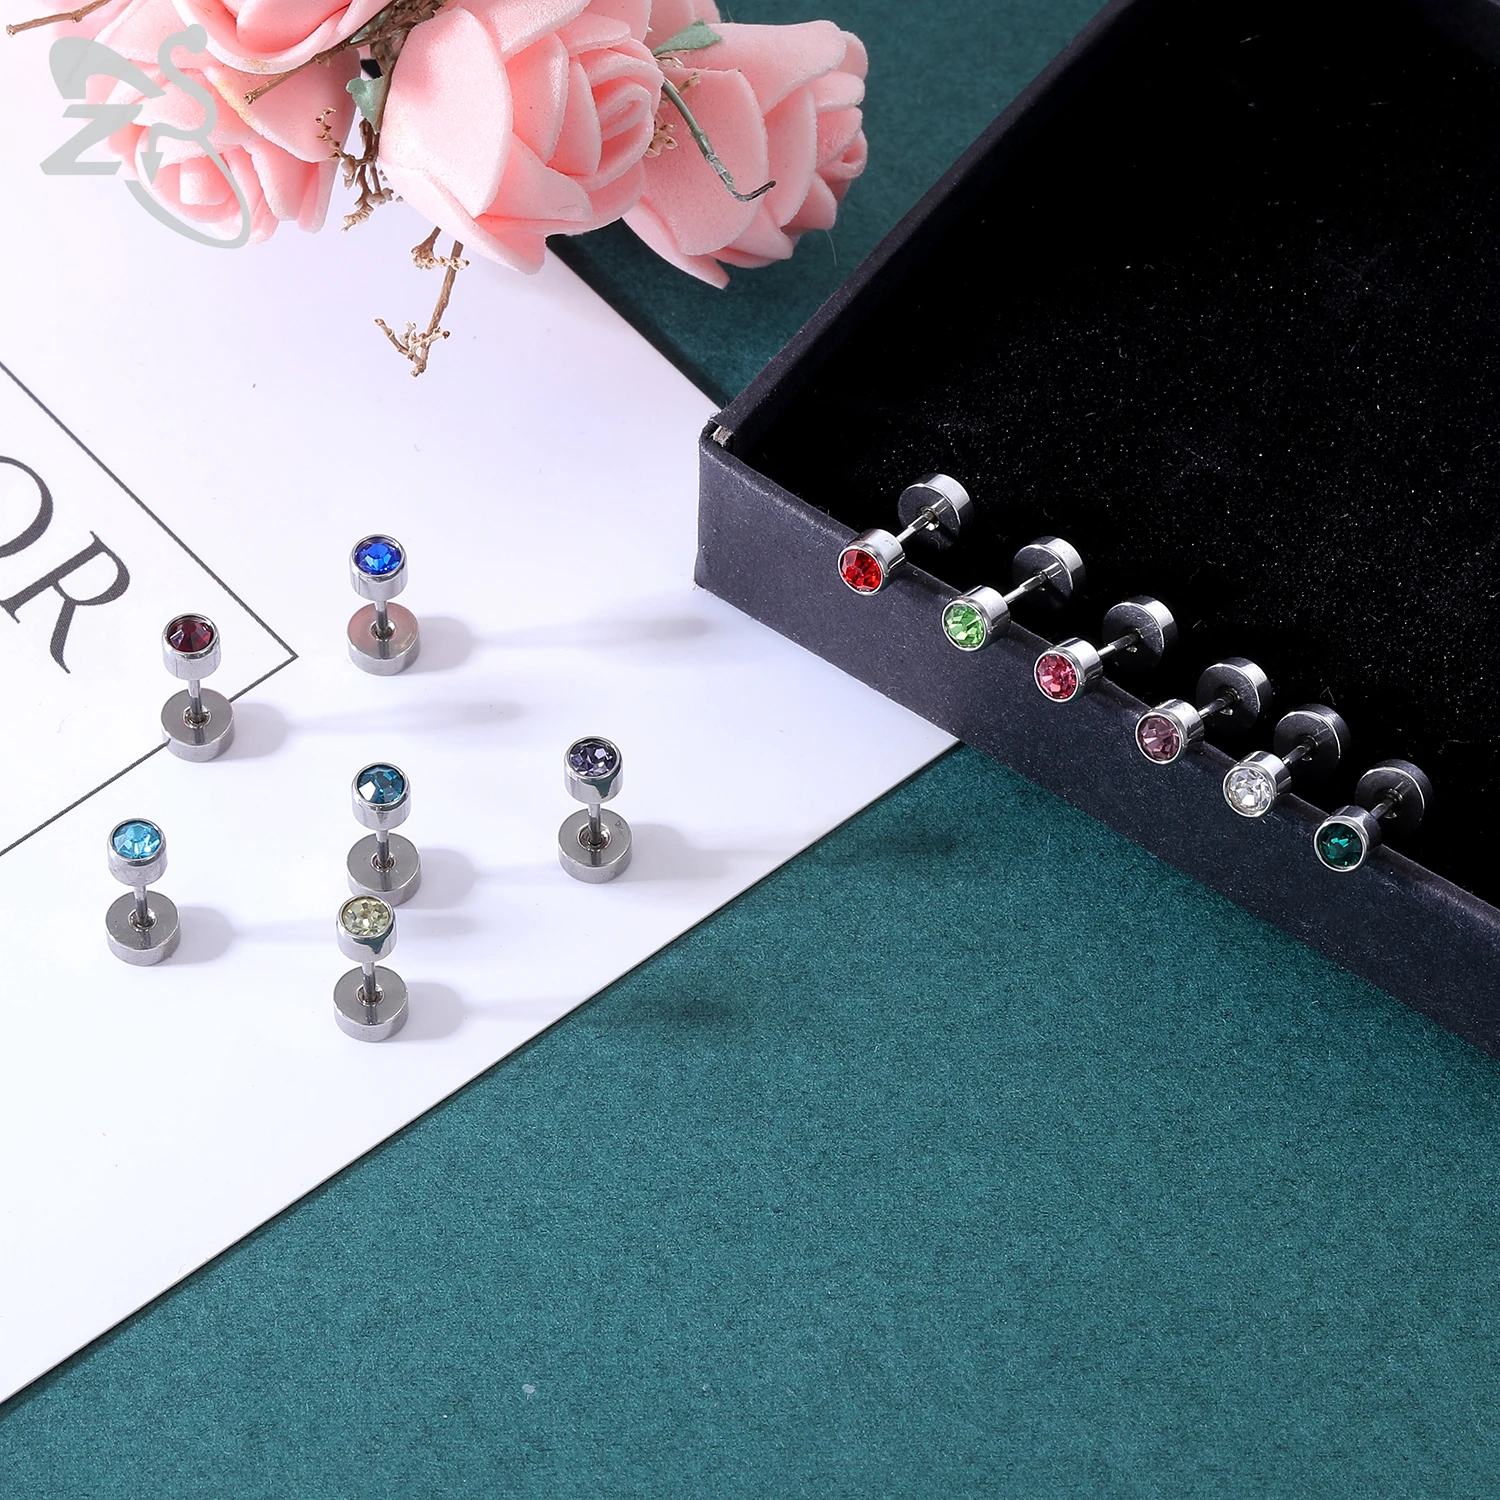 

ZS 12 Pairs/lot Round Crystal Stud Earrings For Women Girls 20G Stainless Steel Earring Set Helix Tragus Cartilage Piercing Set